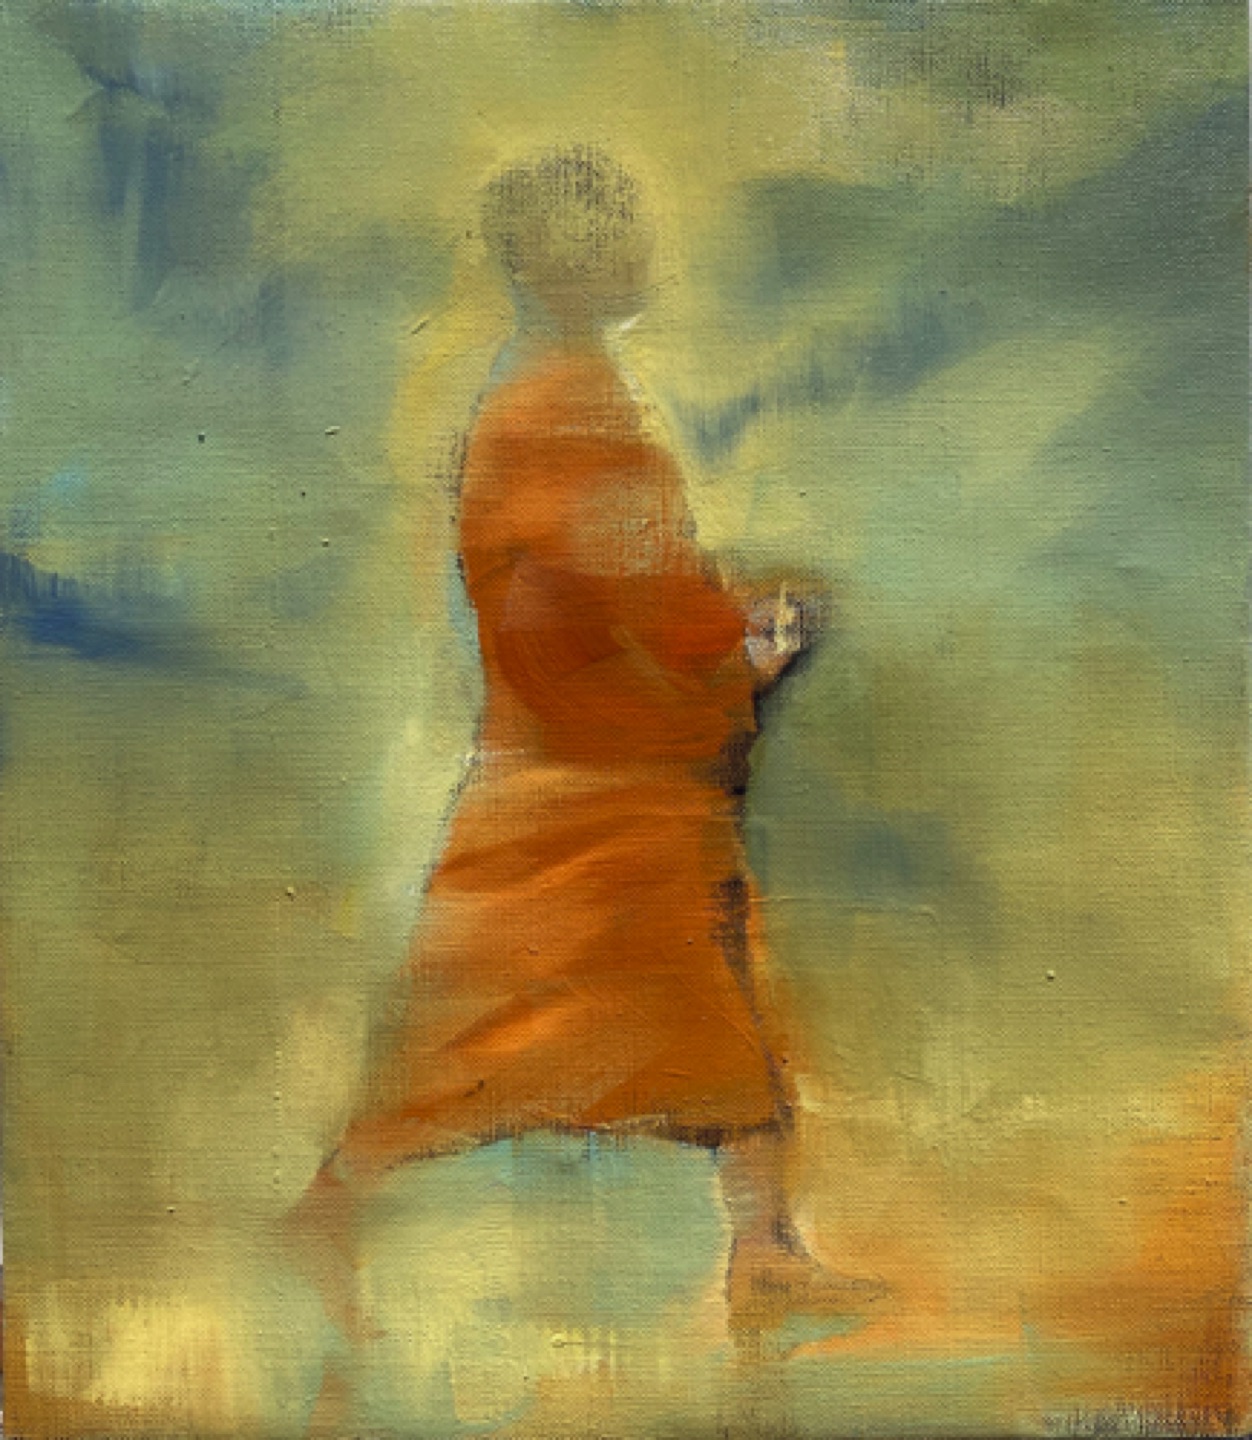 Gregg Chadwick
Saffron and Lapis
14"x12" oil on linen 2023
Private Collection